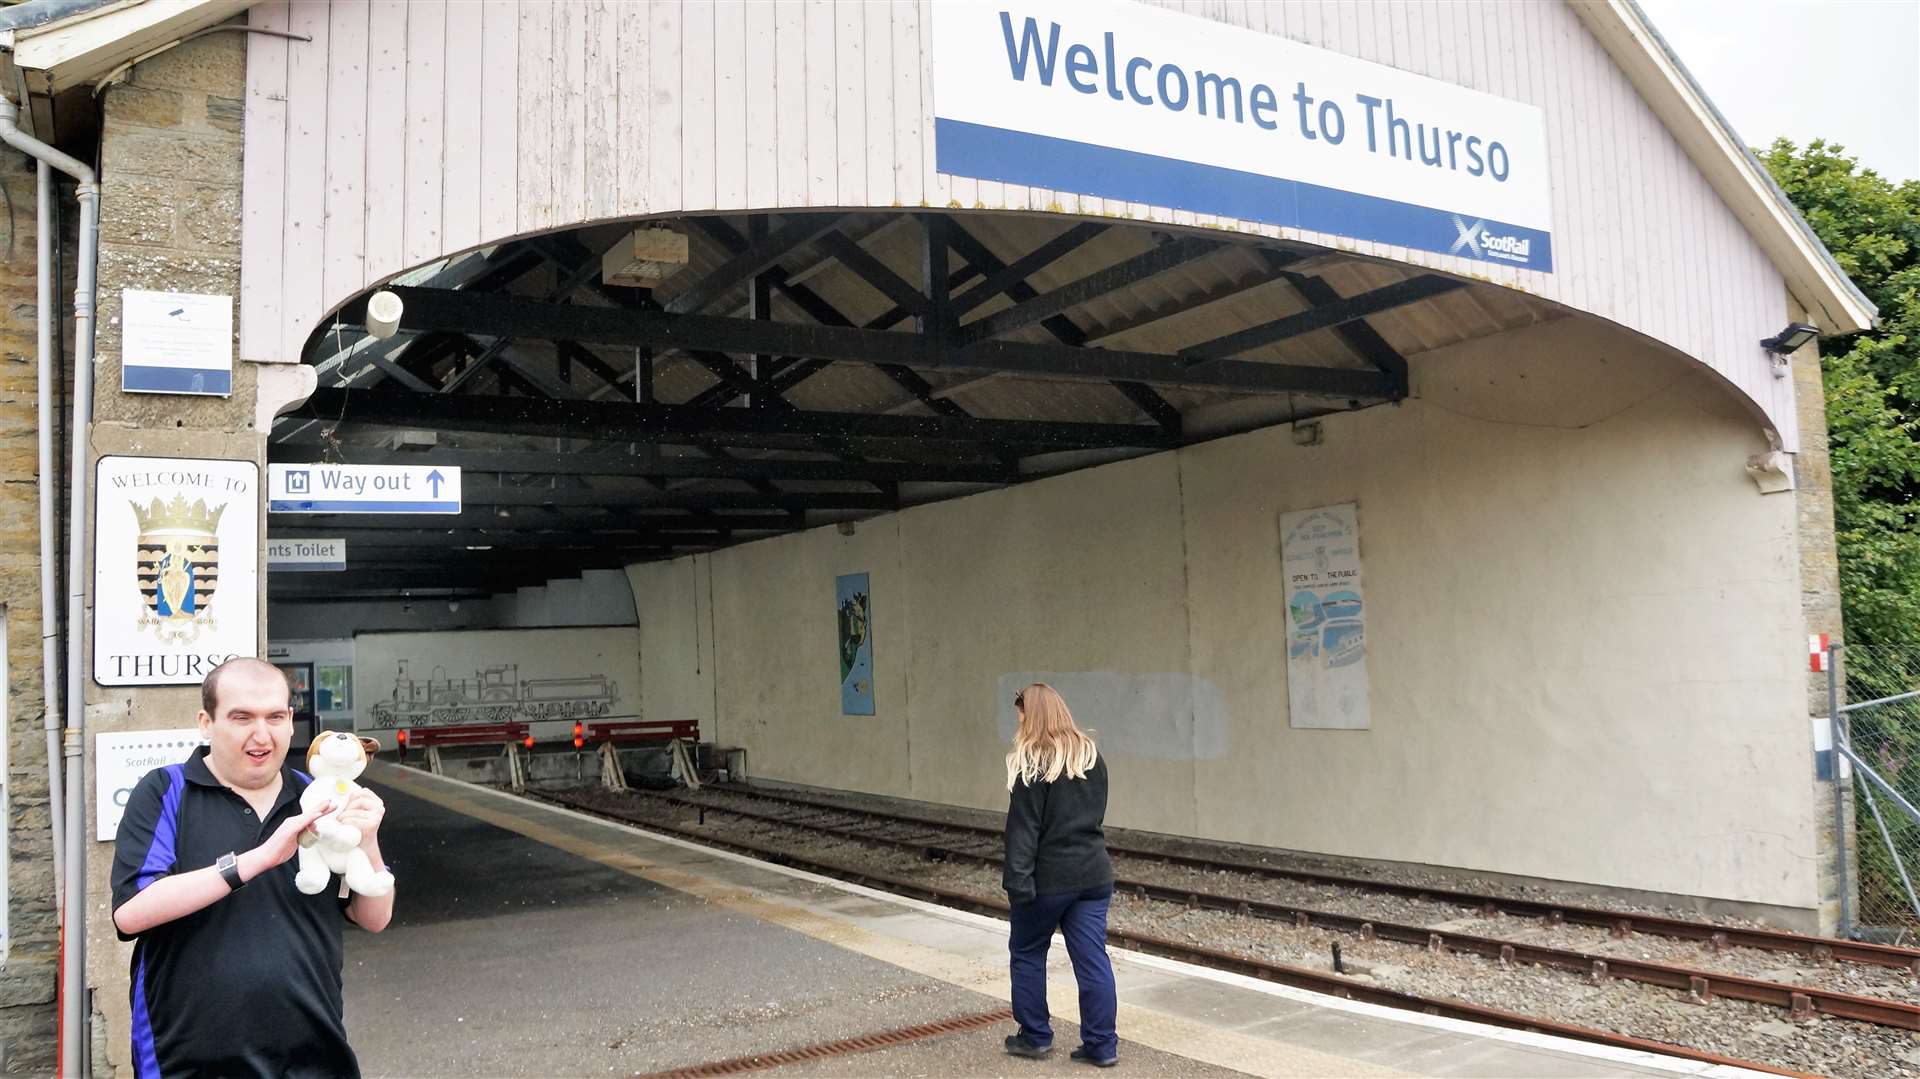 People waiting for a train at Thurso station before lockdown.